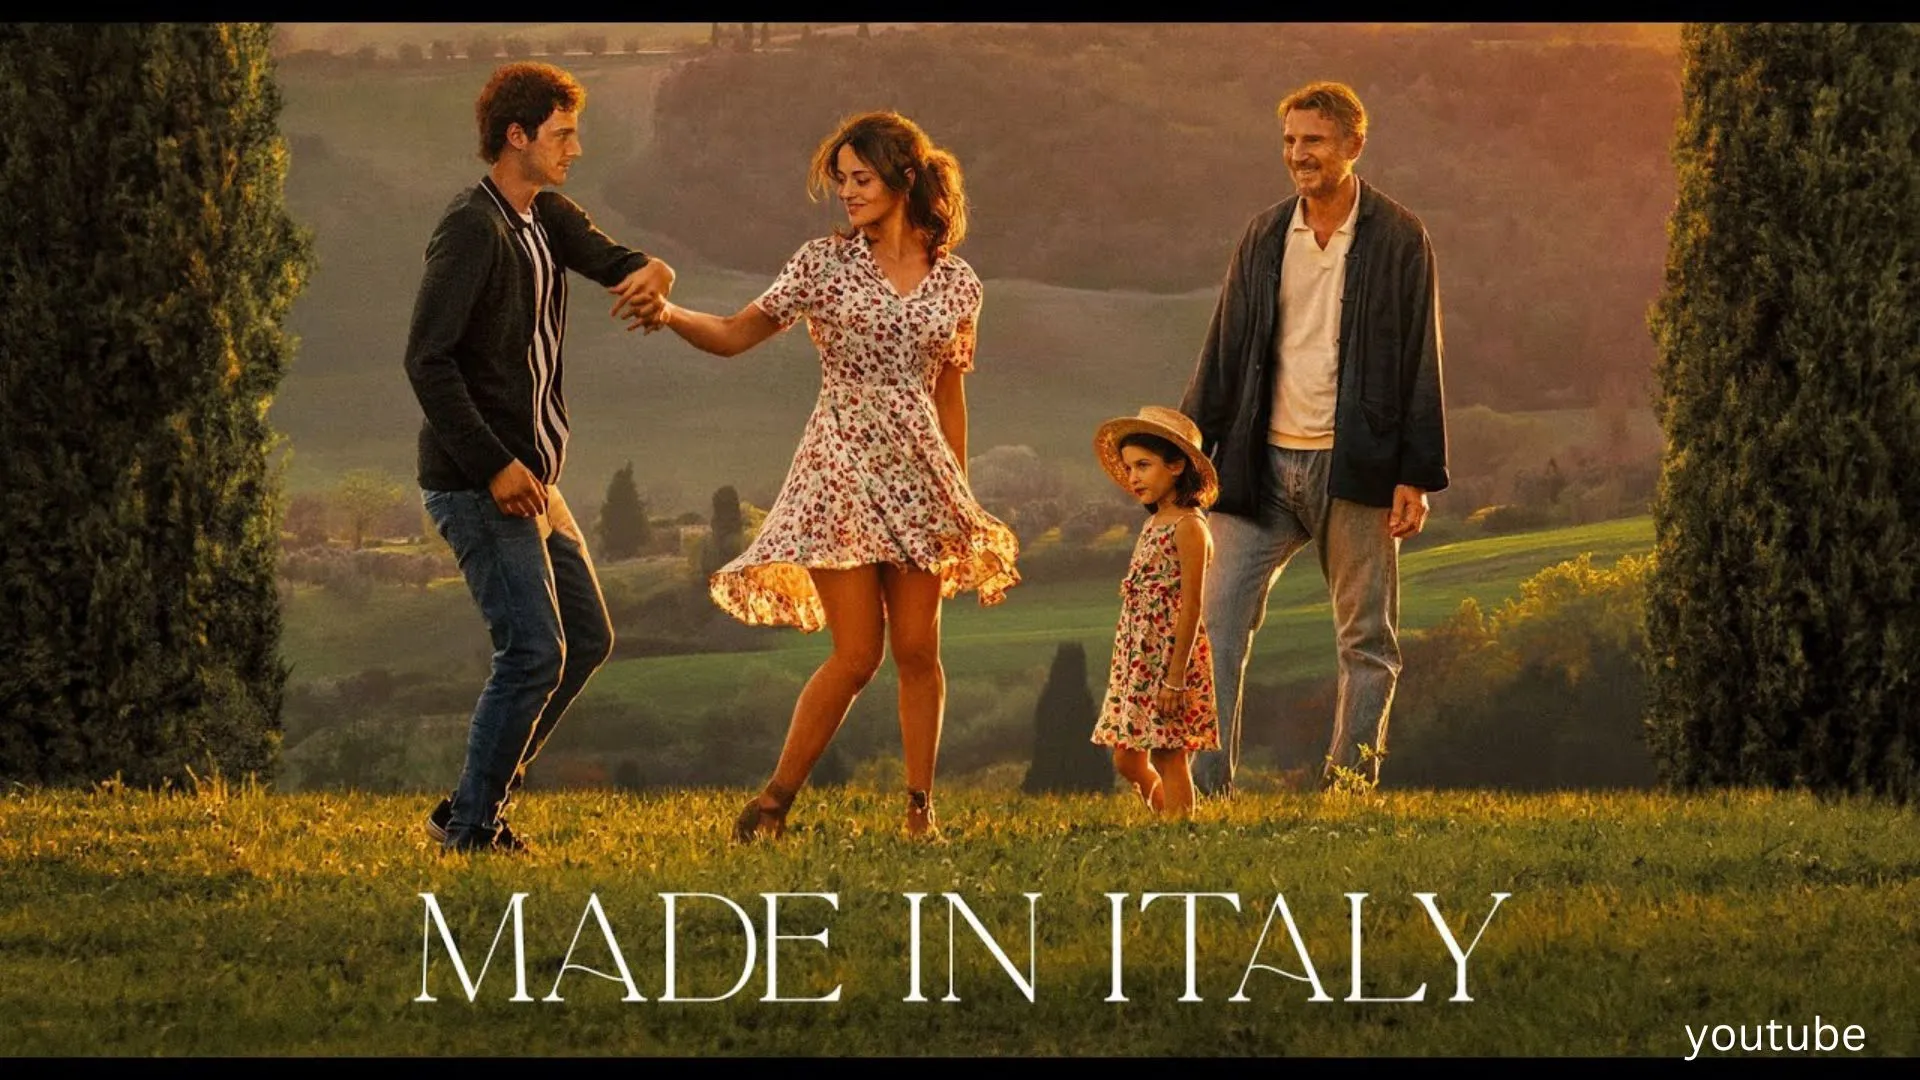 Film Review - Made In Italy (2020)